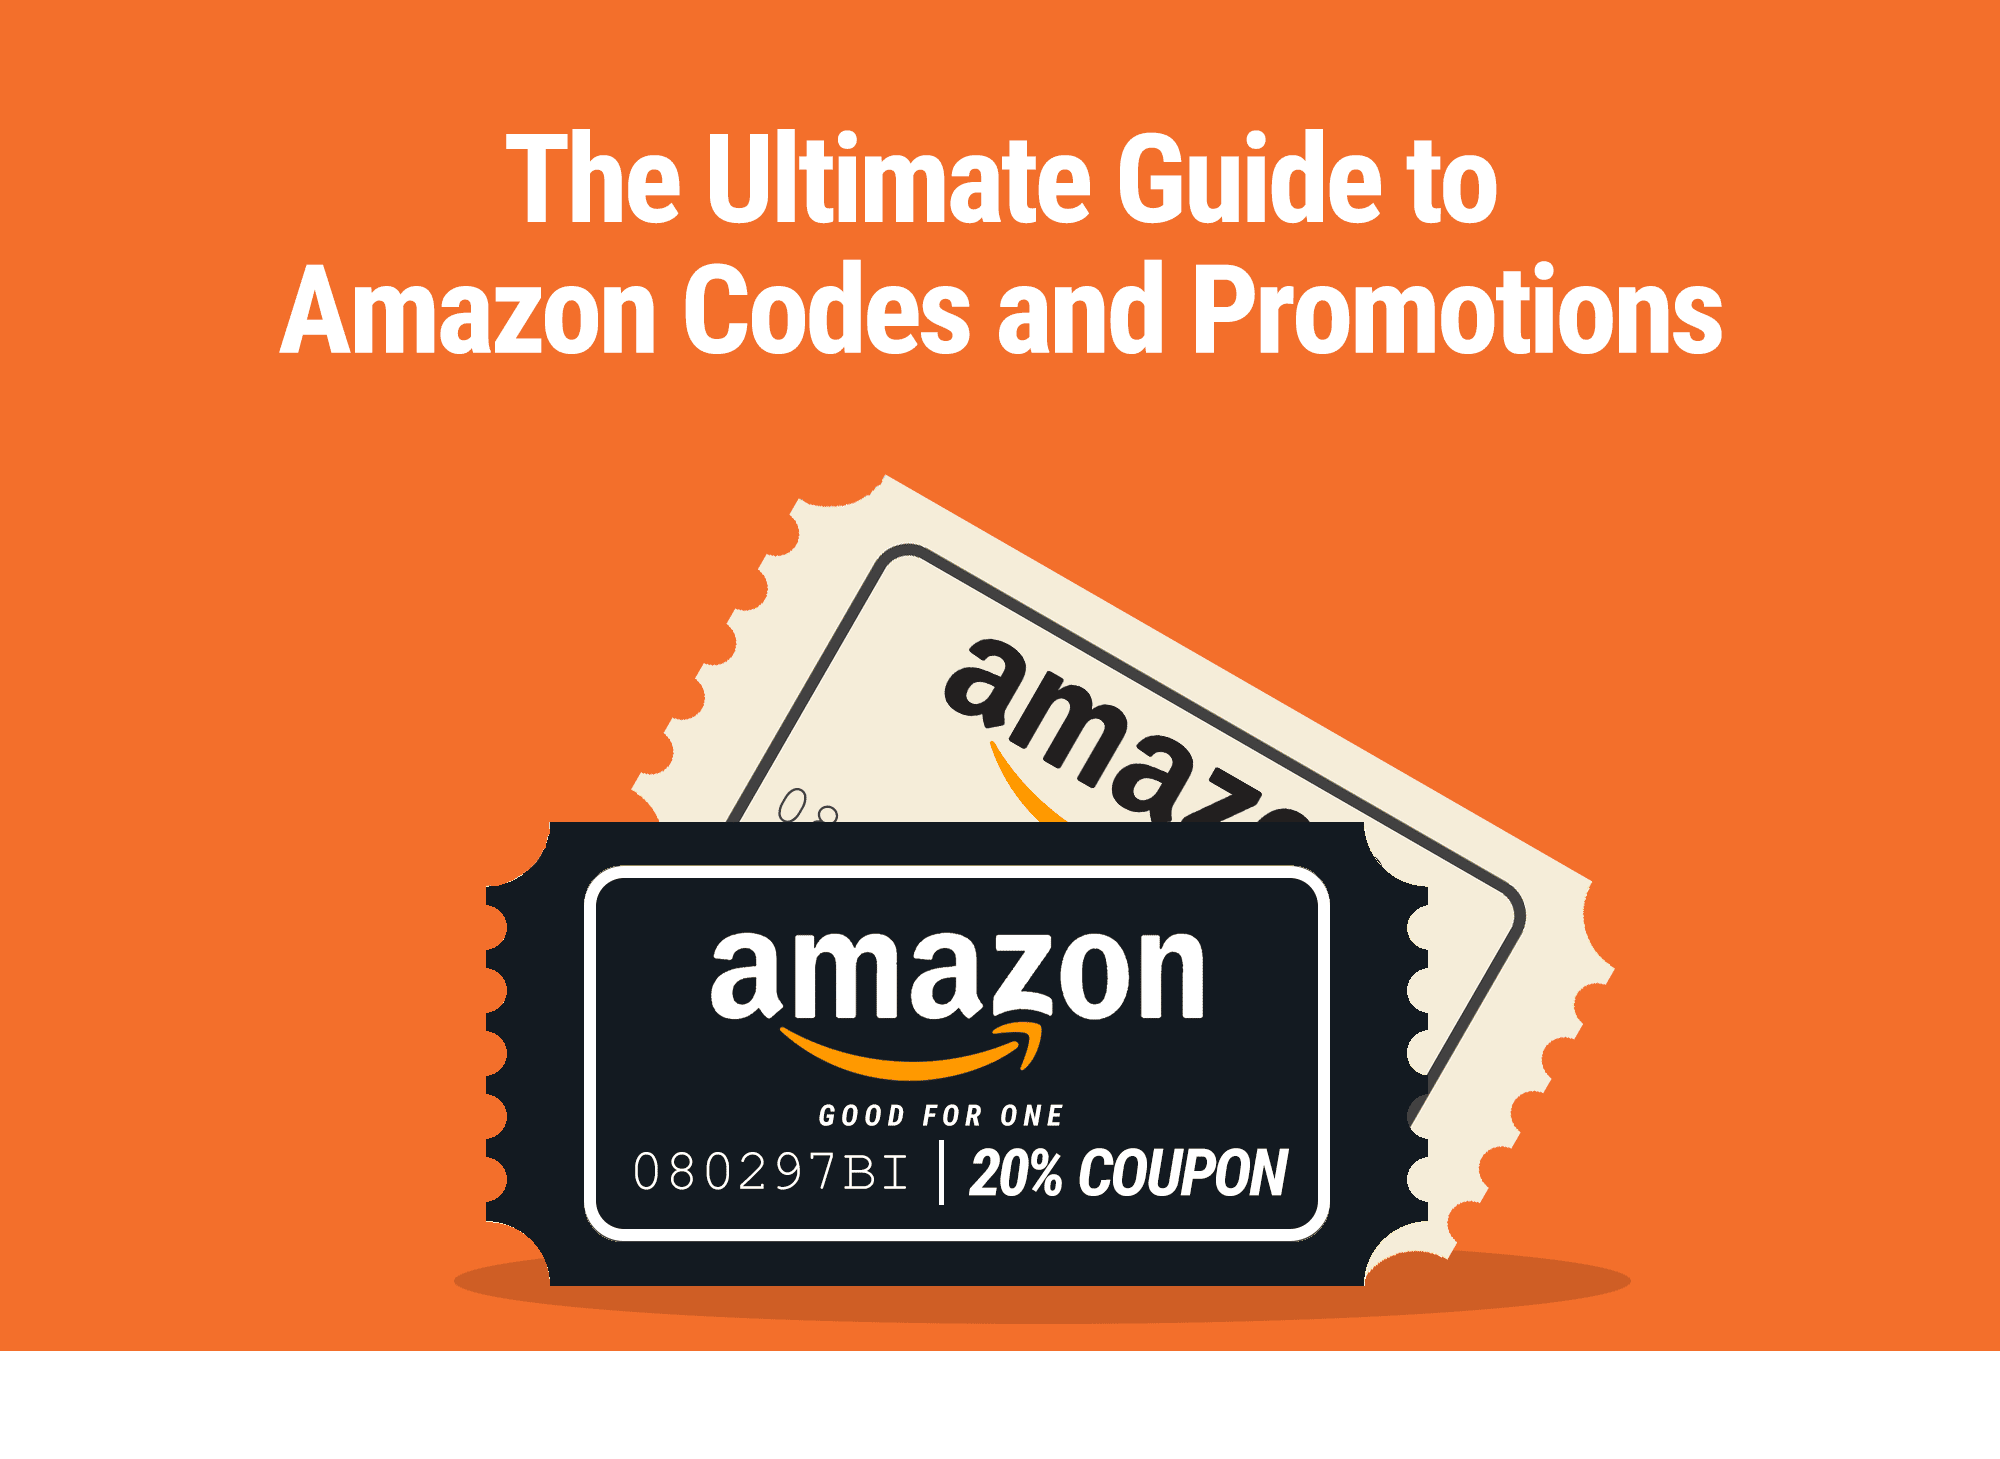 Share, Request & Trade YOUR Gift Cards, Coupons & Promo Codes (11/29/20)